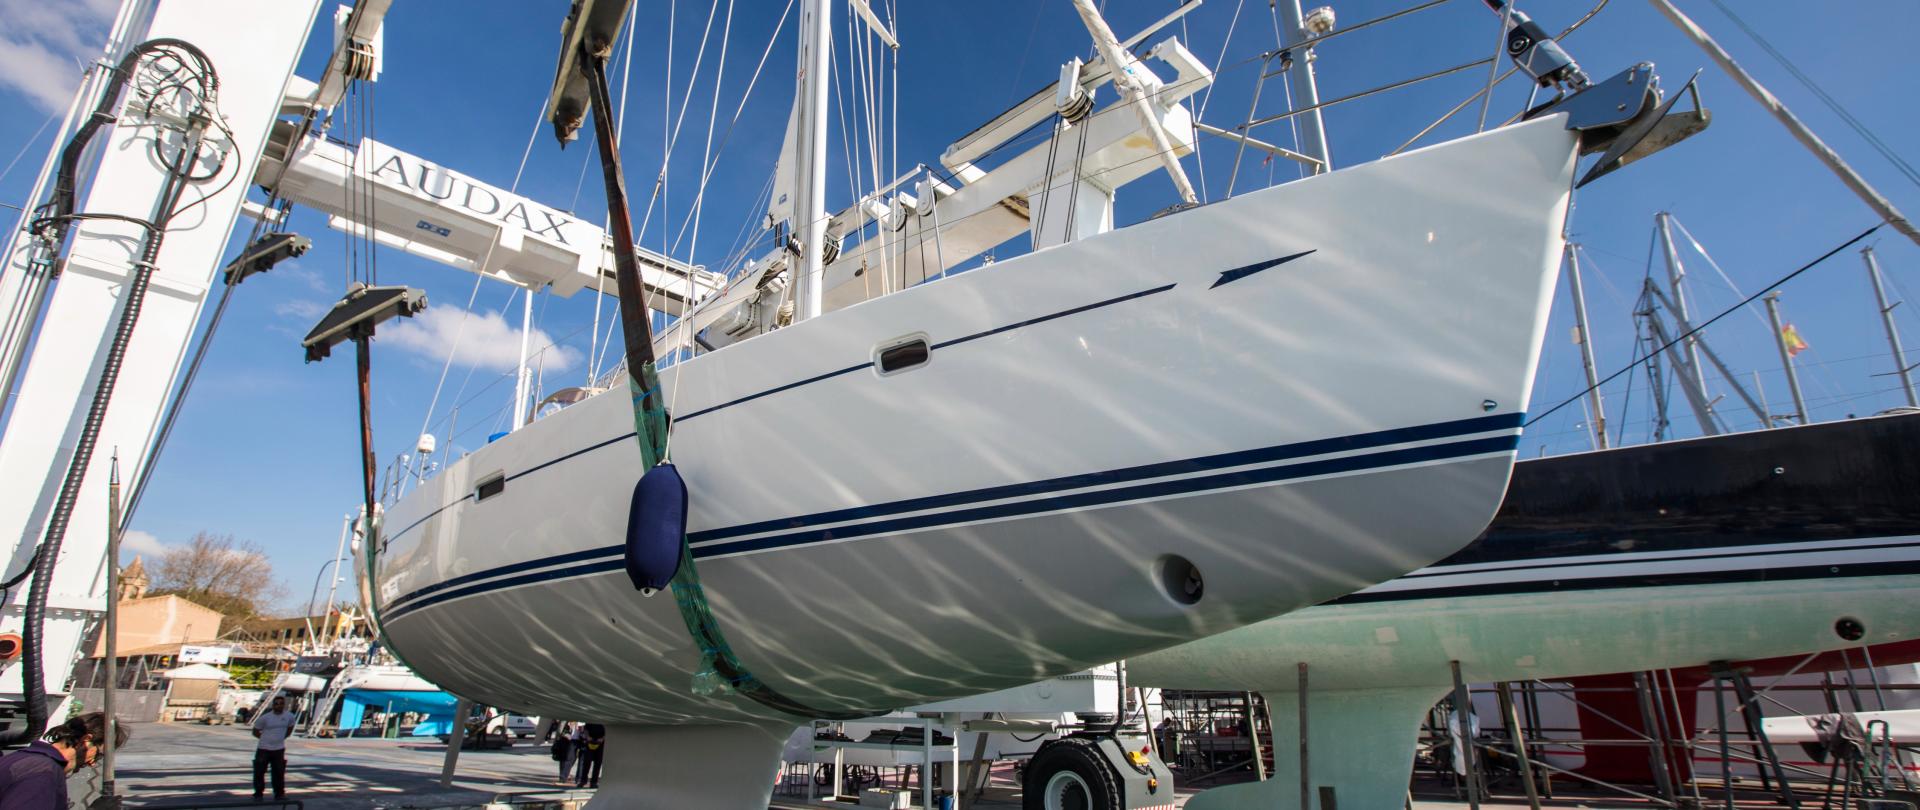 Oyster Yacht Refurbishment Haul Out